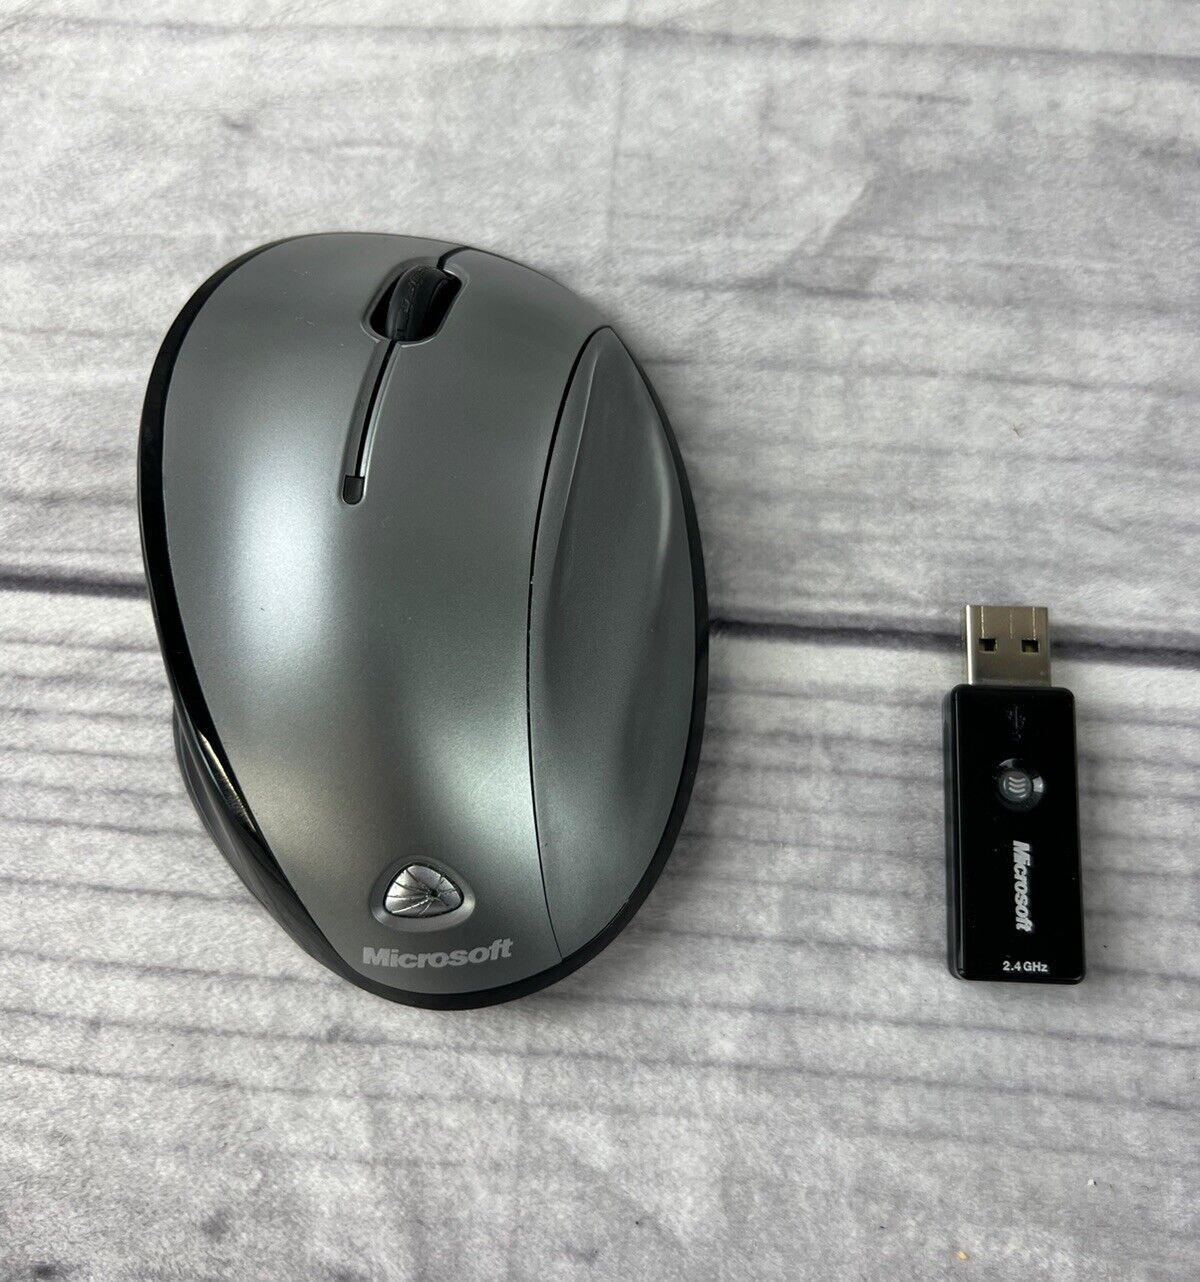 Microsoft Wireless Laser Mouse 6000 v2.0 and  USB Receiver Dongle 1123